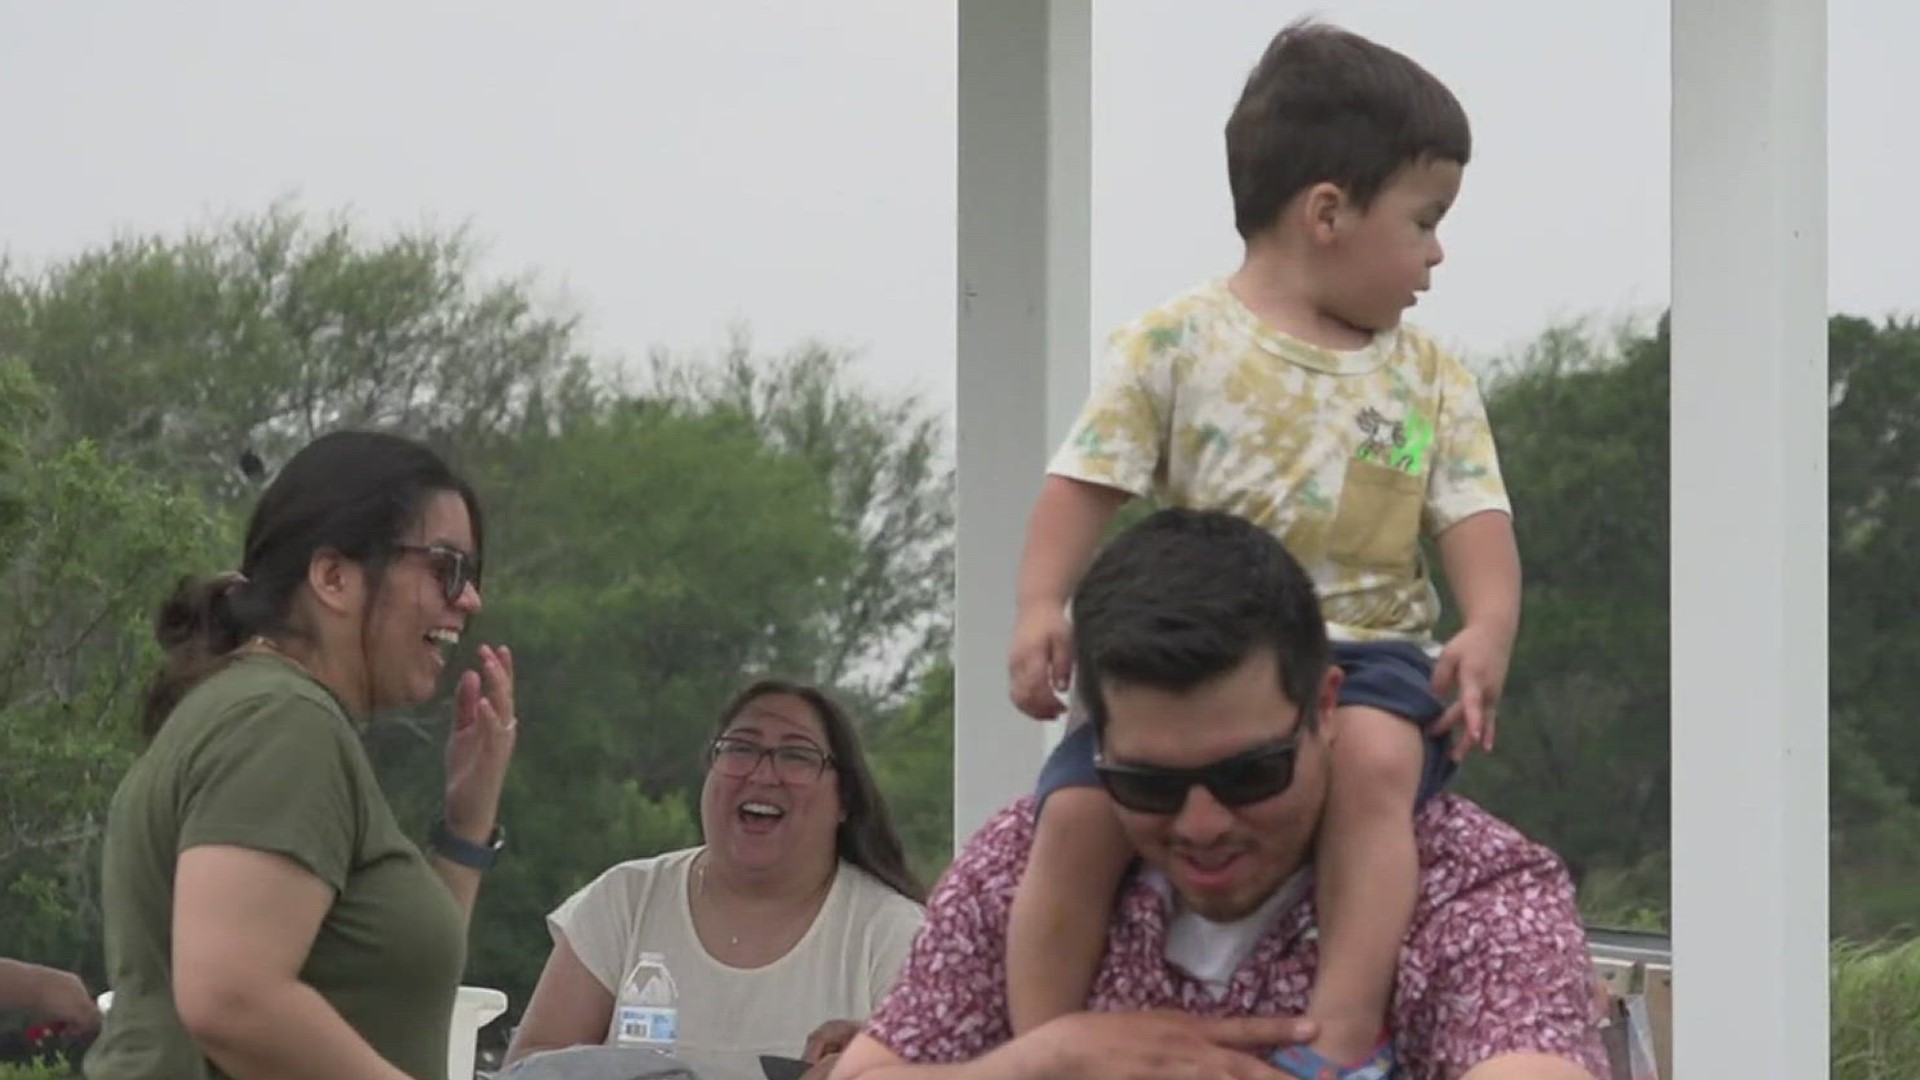 The Easter tradition continued for dozens of families Sunday at Labonte Park.